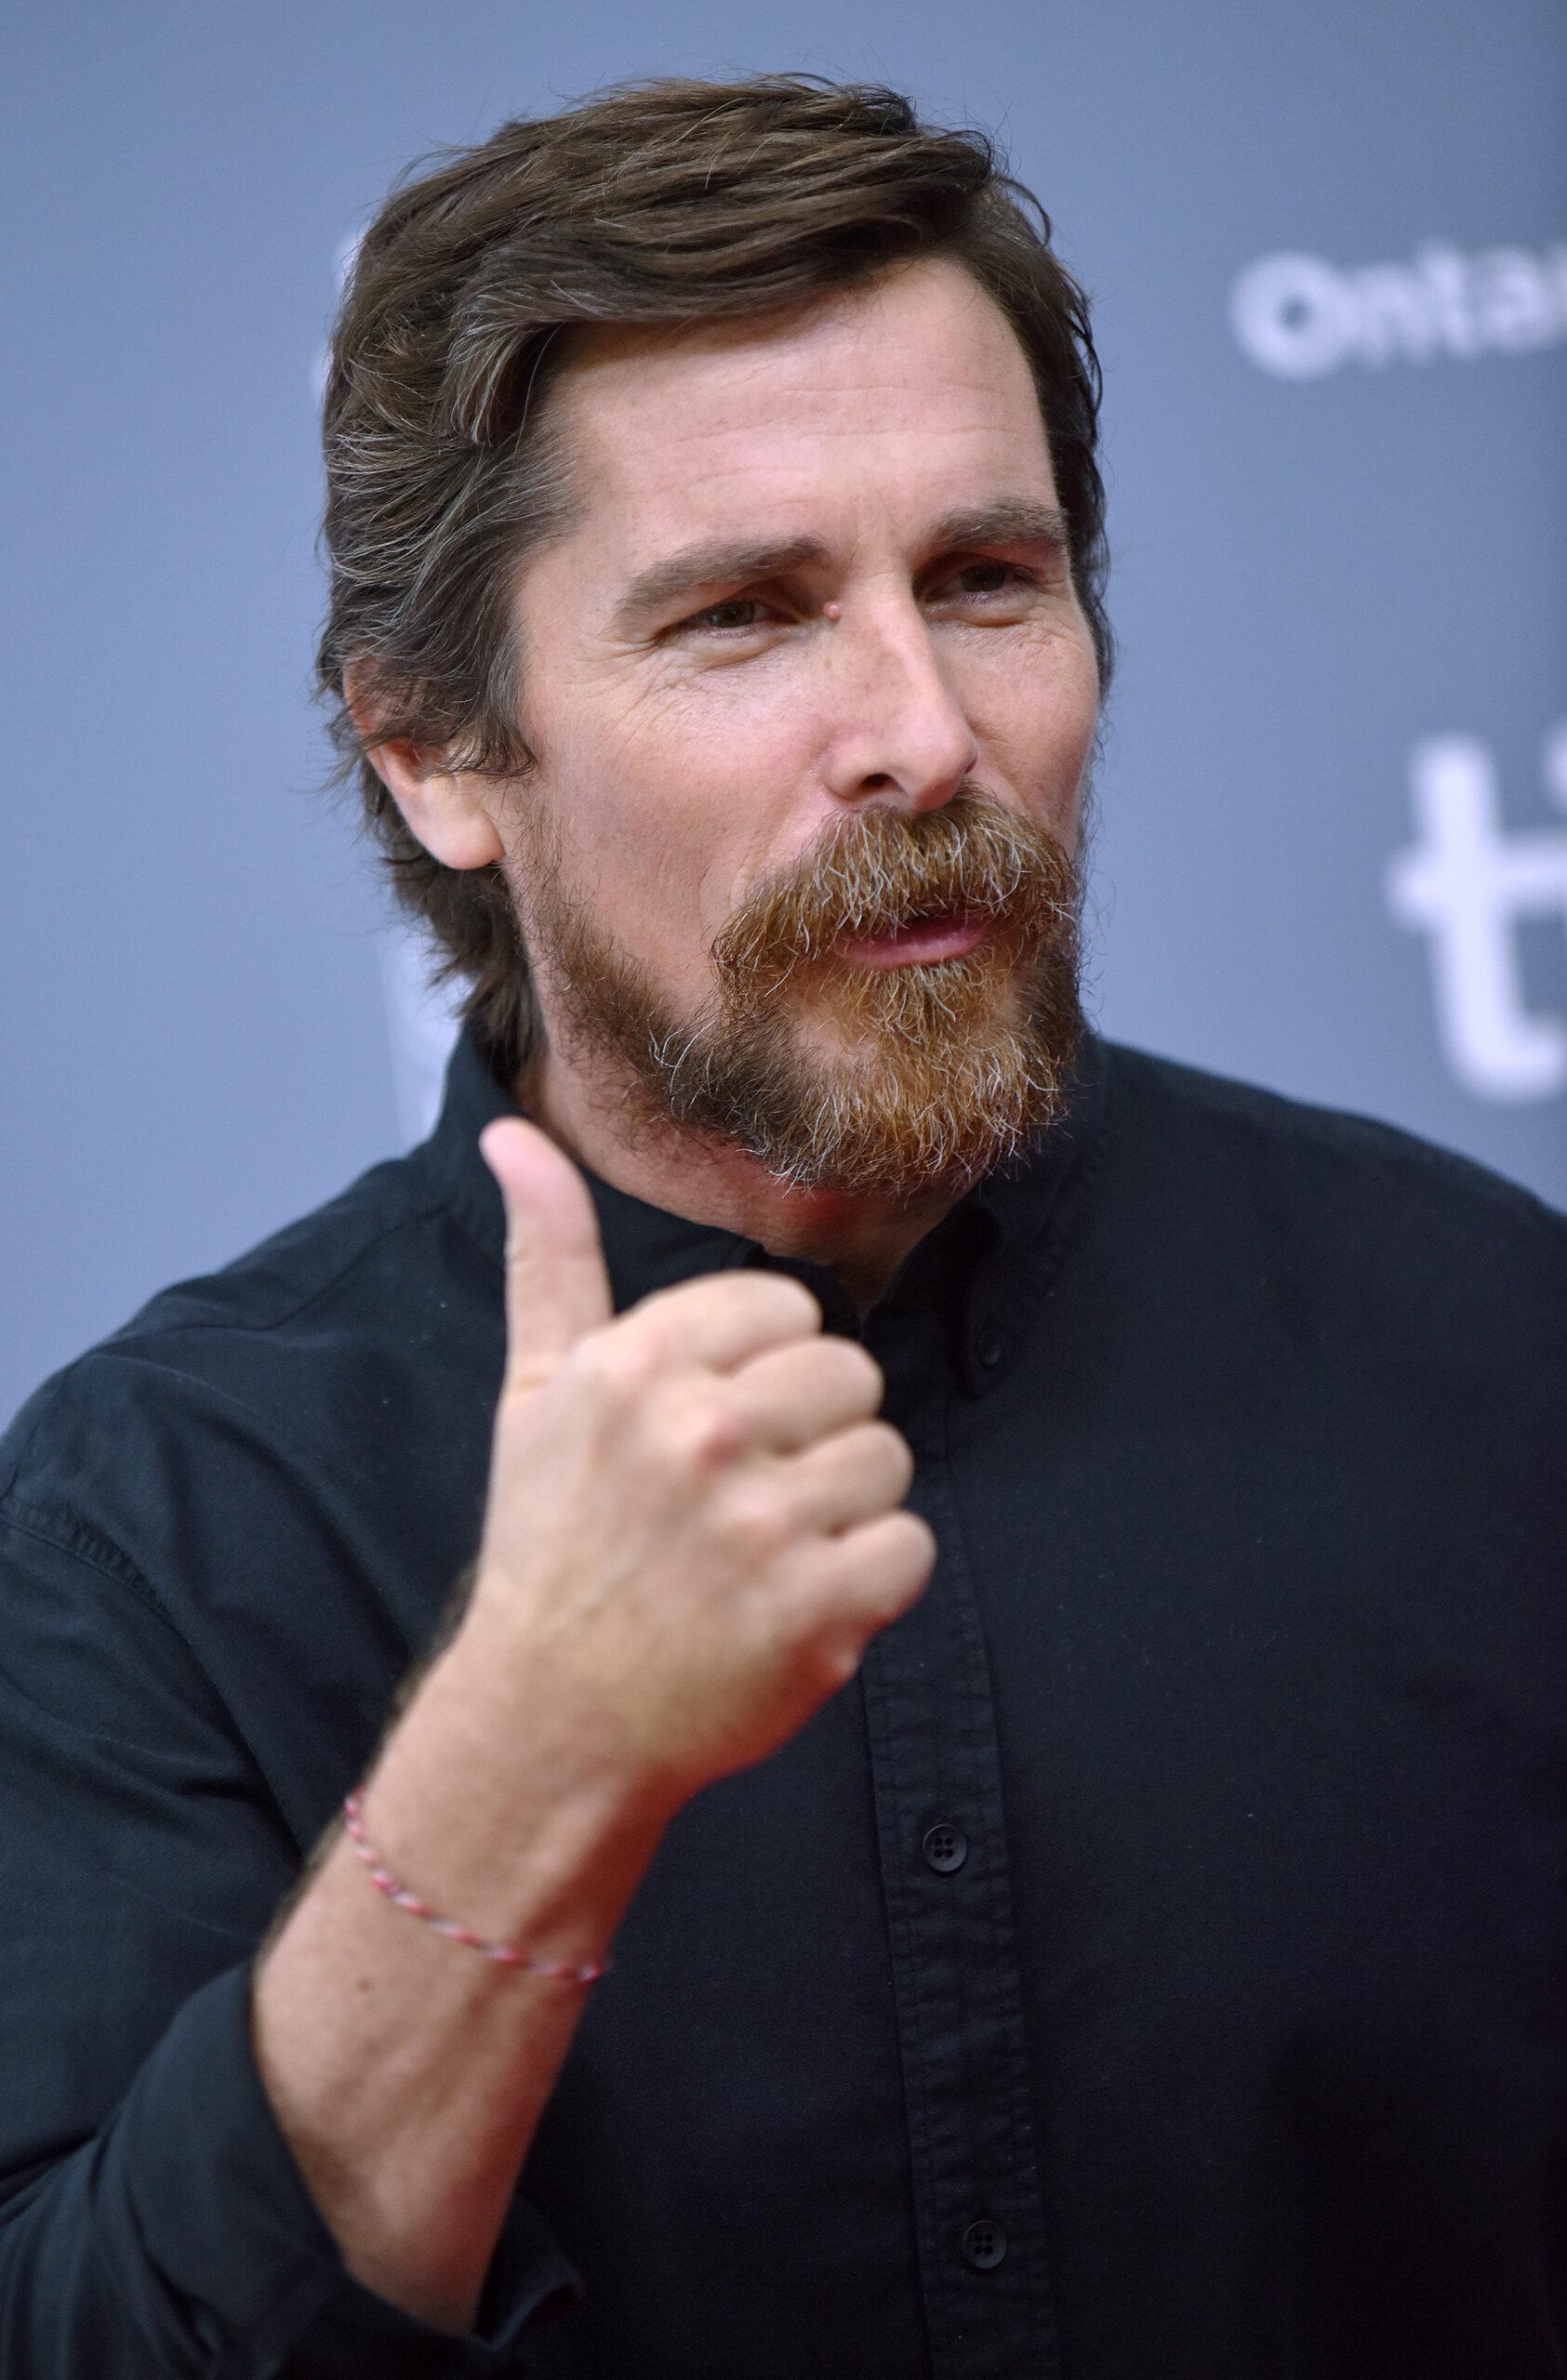 Christian Bale attends the Toronto International Film Festival photocall for 'Ford v Ferrari' at TIFF Bell Lightbox in Toronto, Canada on Tuesday, September 10, 2019. Photo by Chris Chew/UPI 